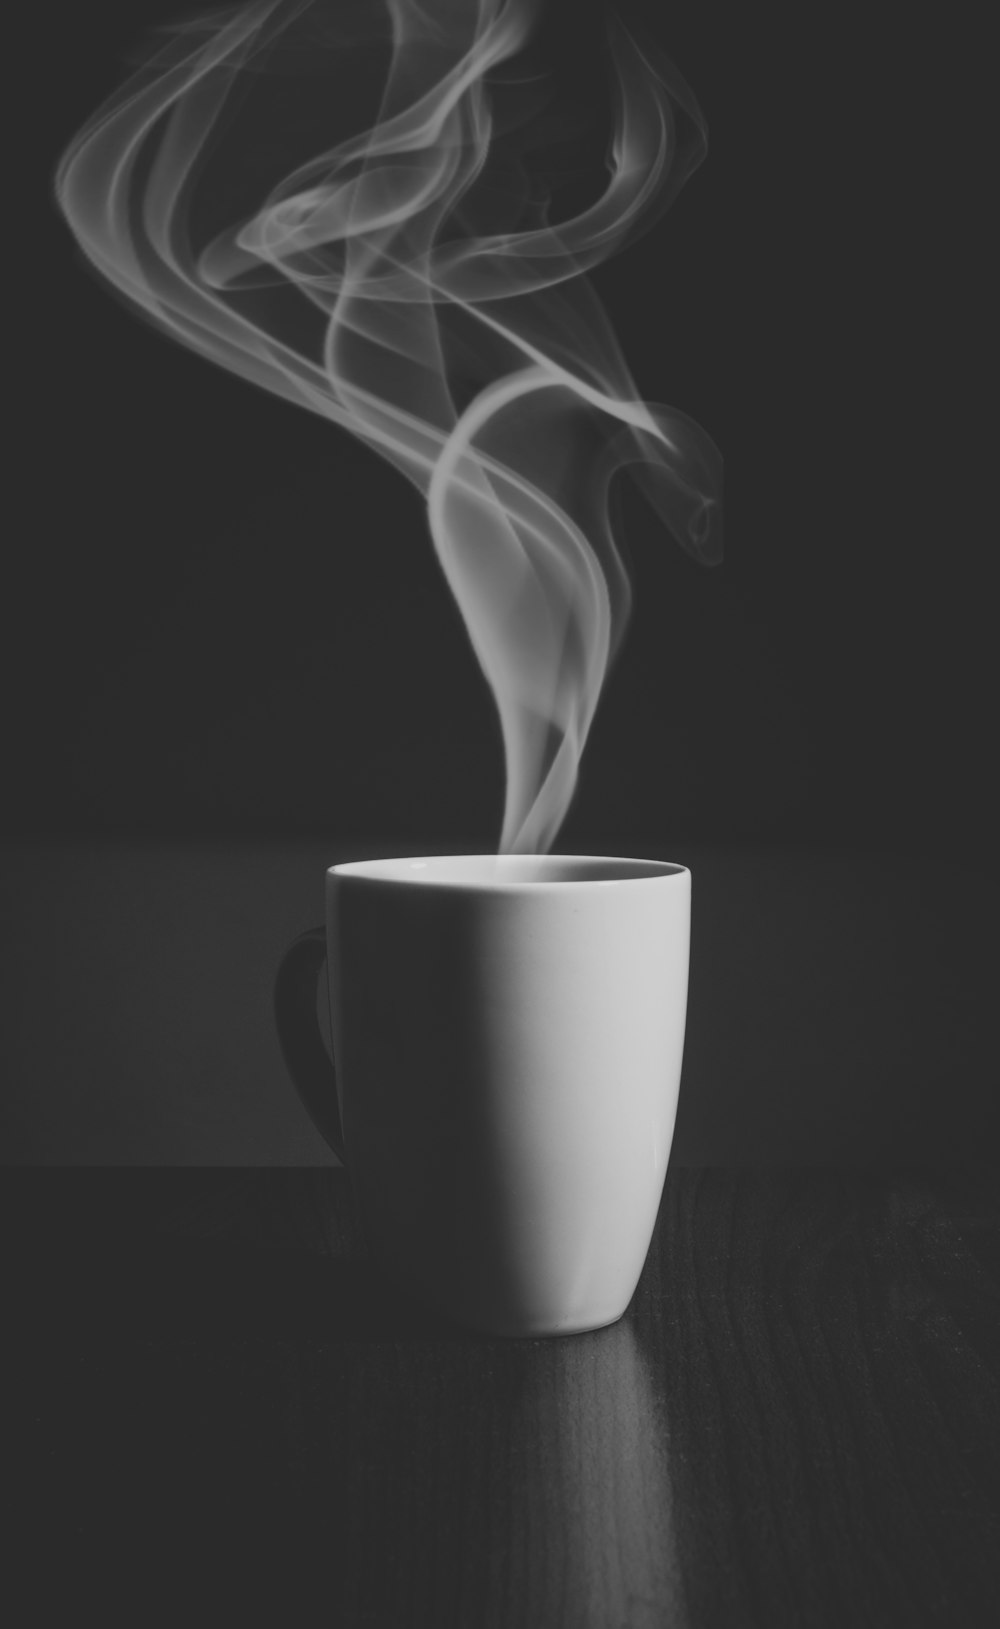 A hot drink in a white cup, with steam rising into the air.